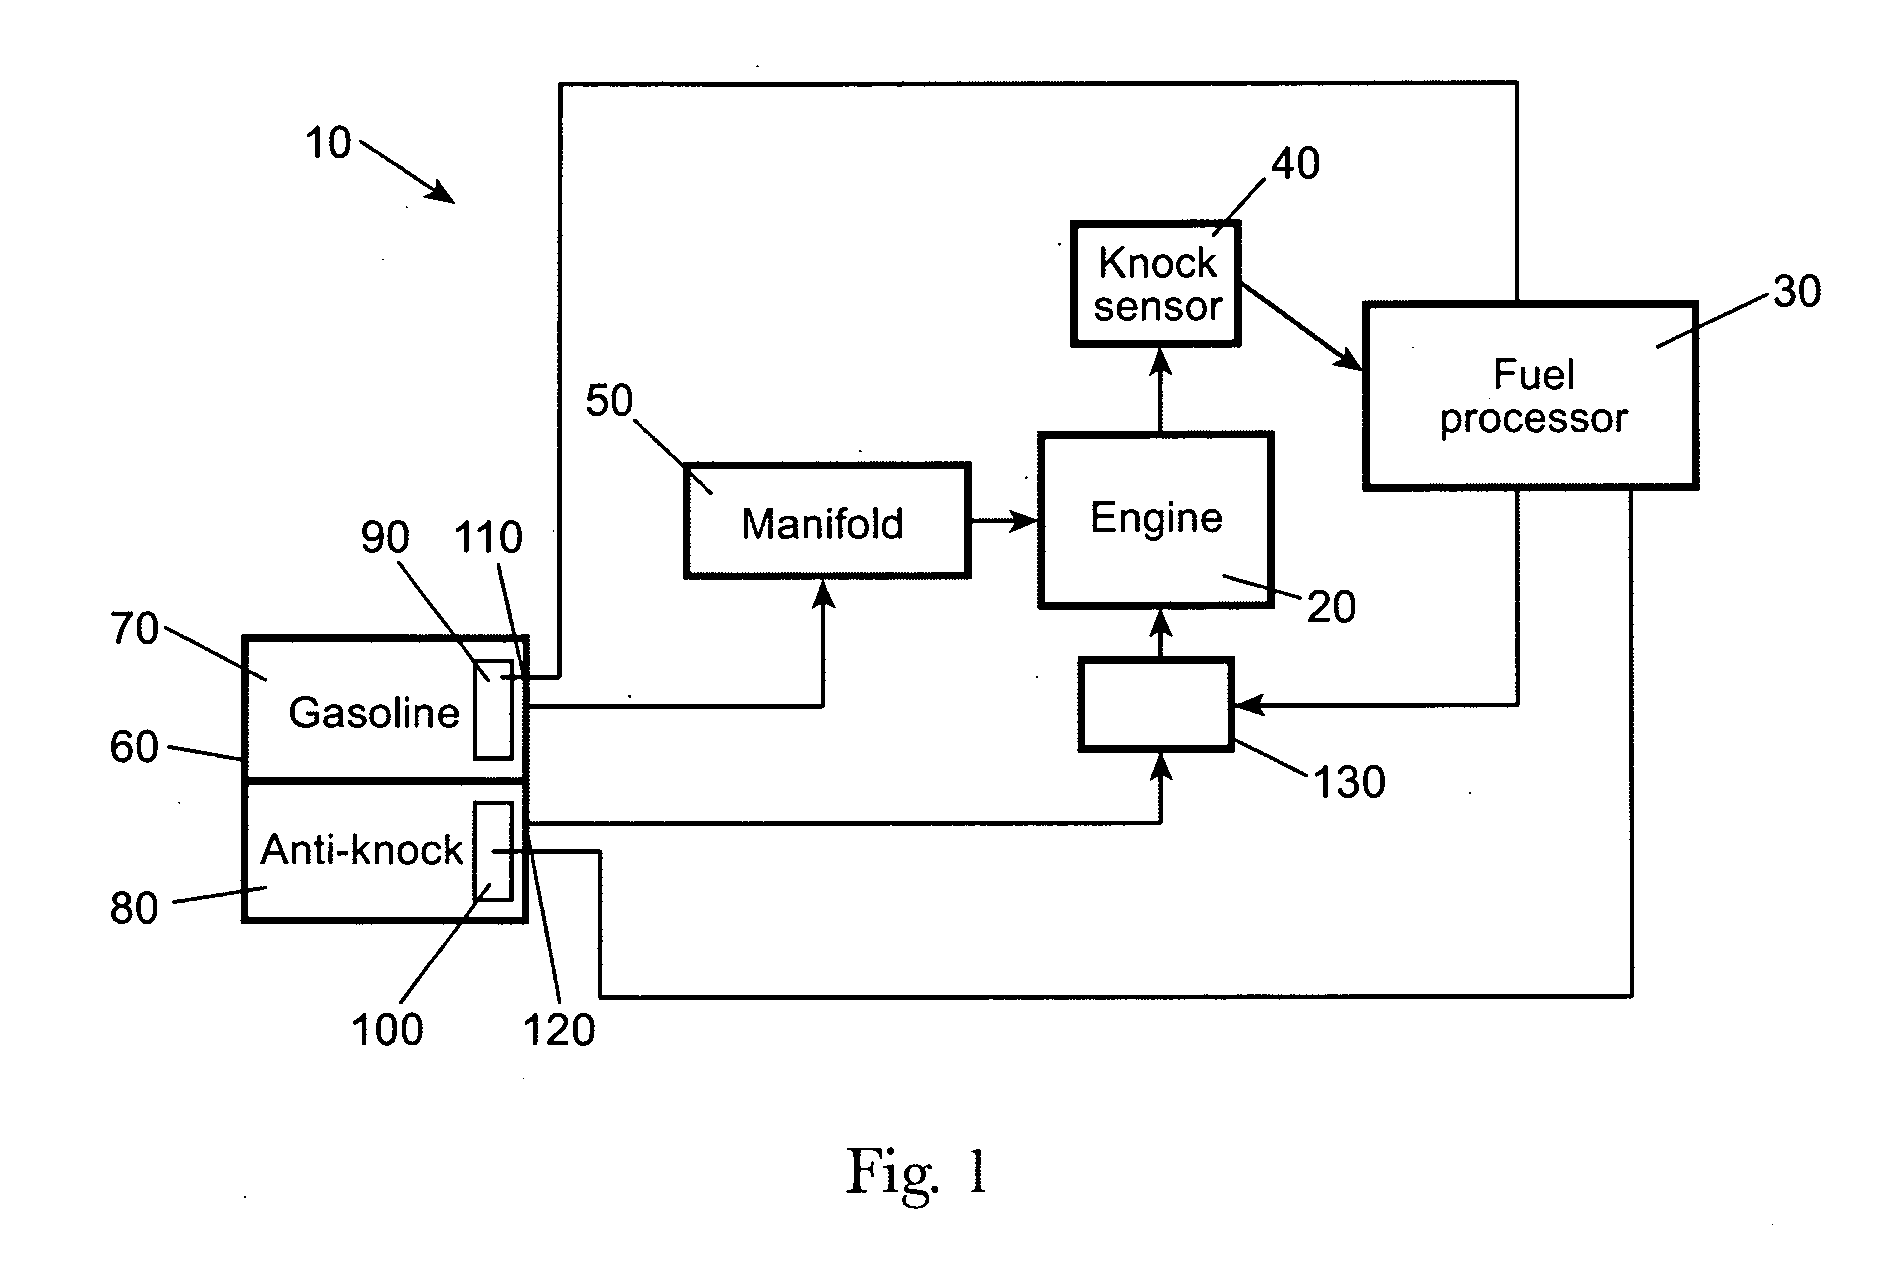 Fuel System for Improved Fuel Efficiency Utilizing Glycols in a Spark Ignition Engine